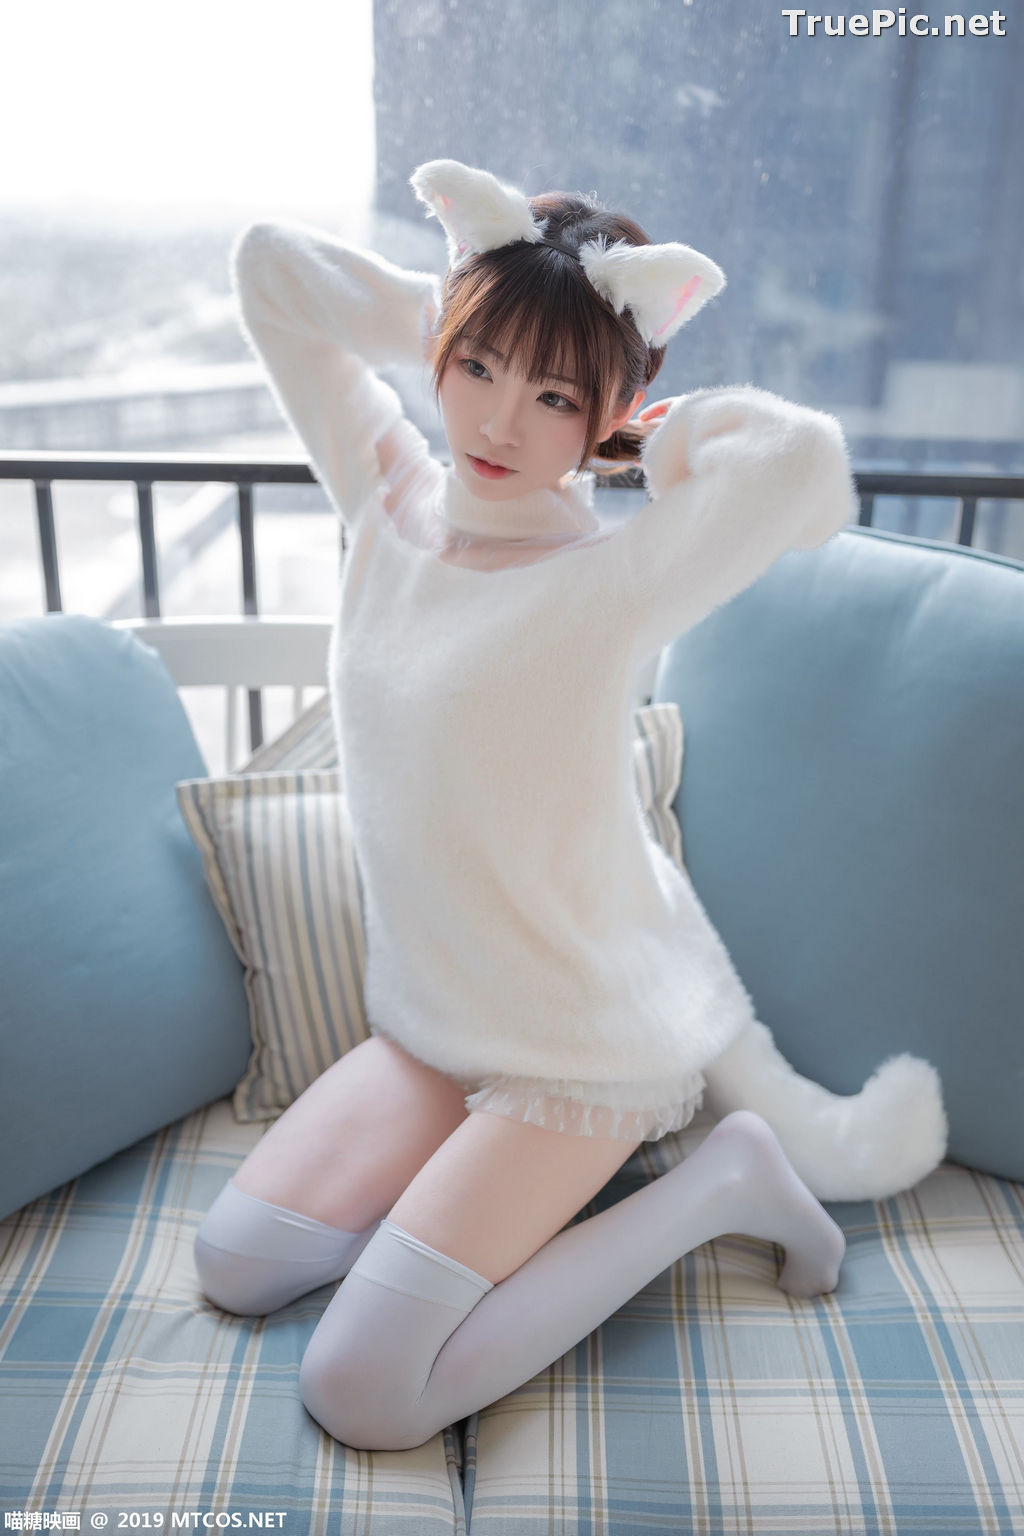 Image [MTCos] 喵糖映画 Vol.027 – Chinese Cute Model – Beautiful White Cat - TruePic.net - Picture-6